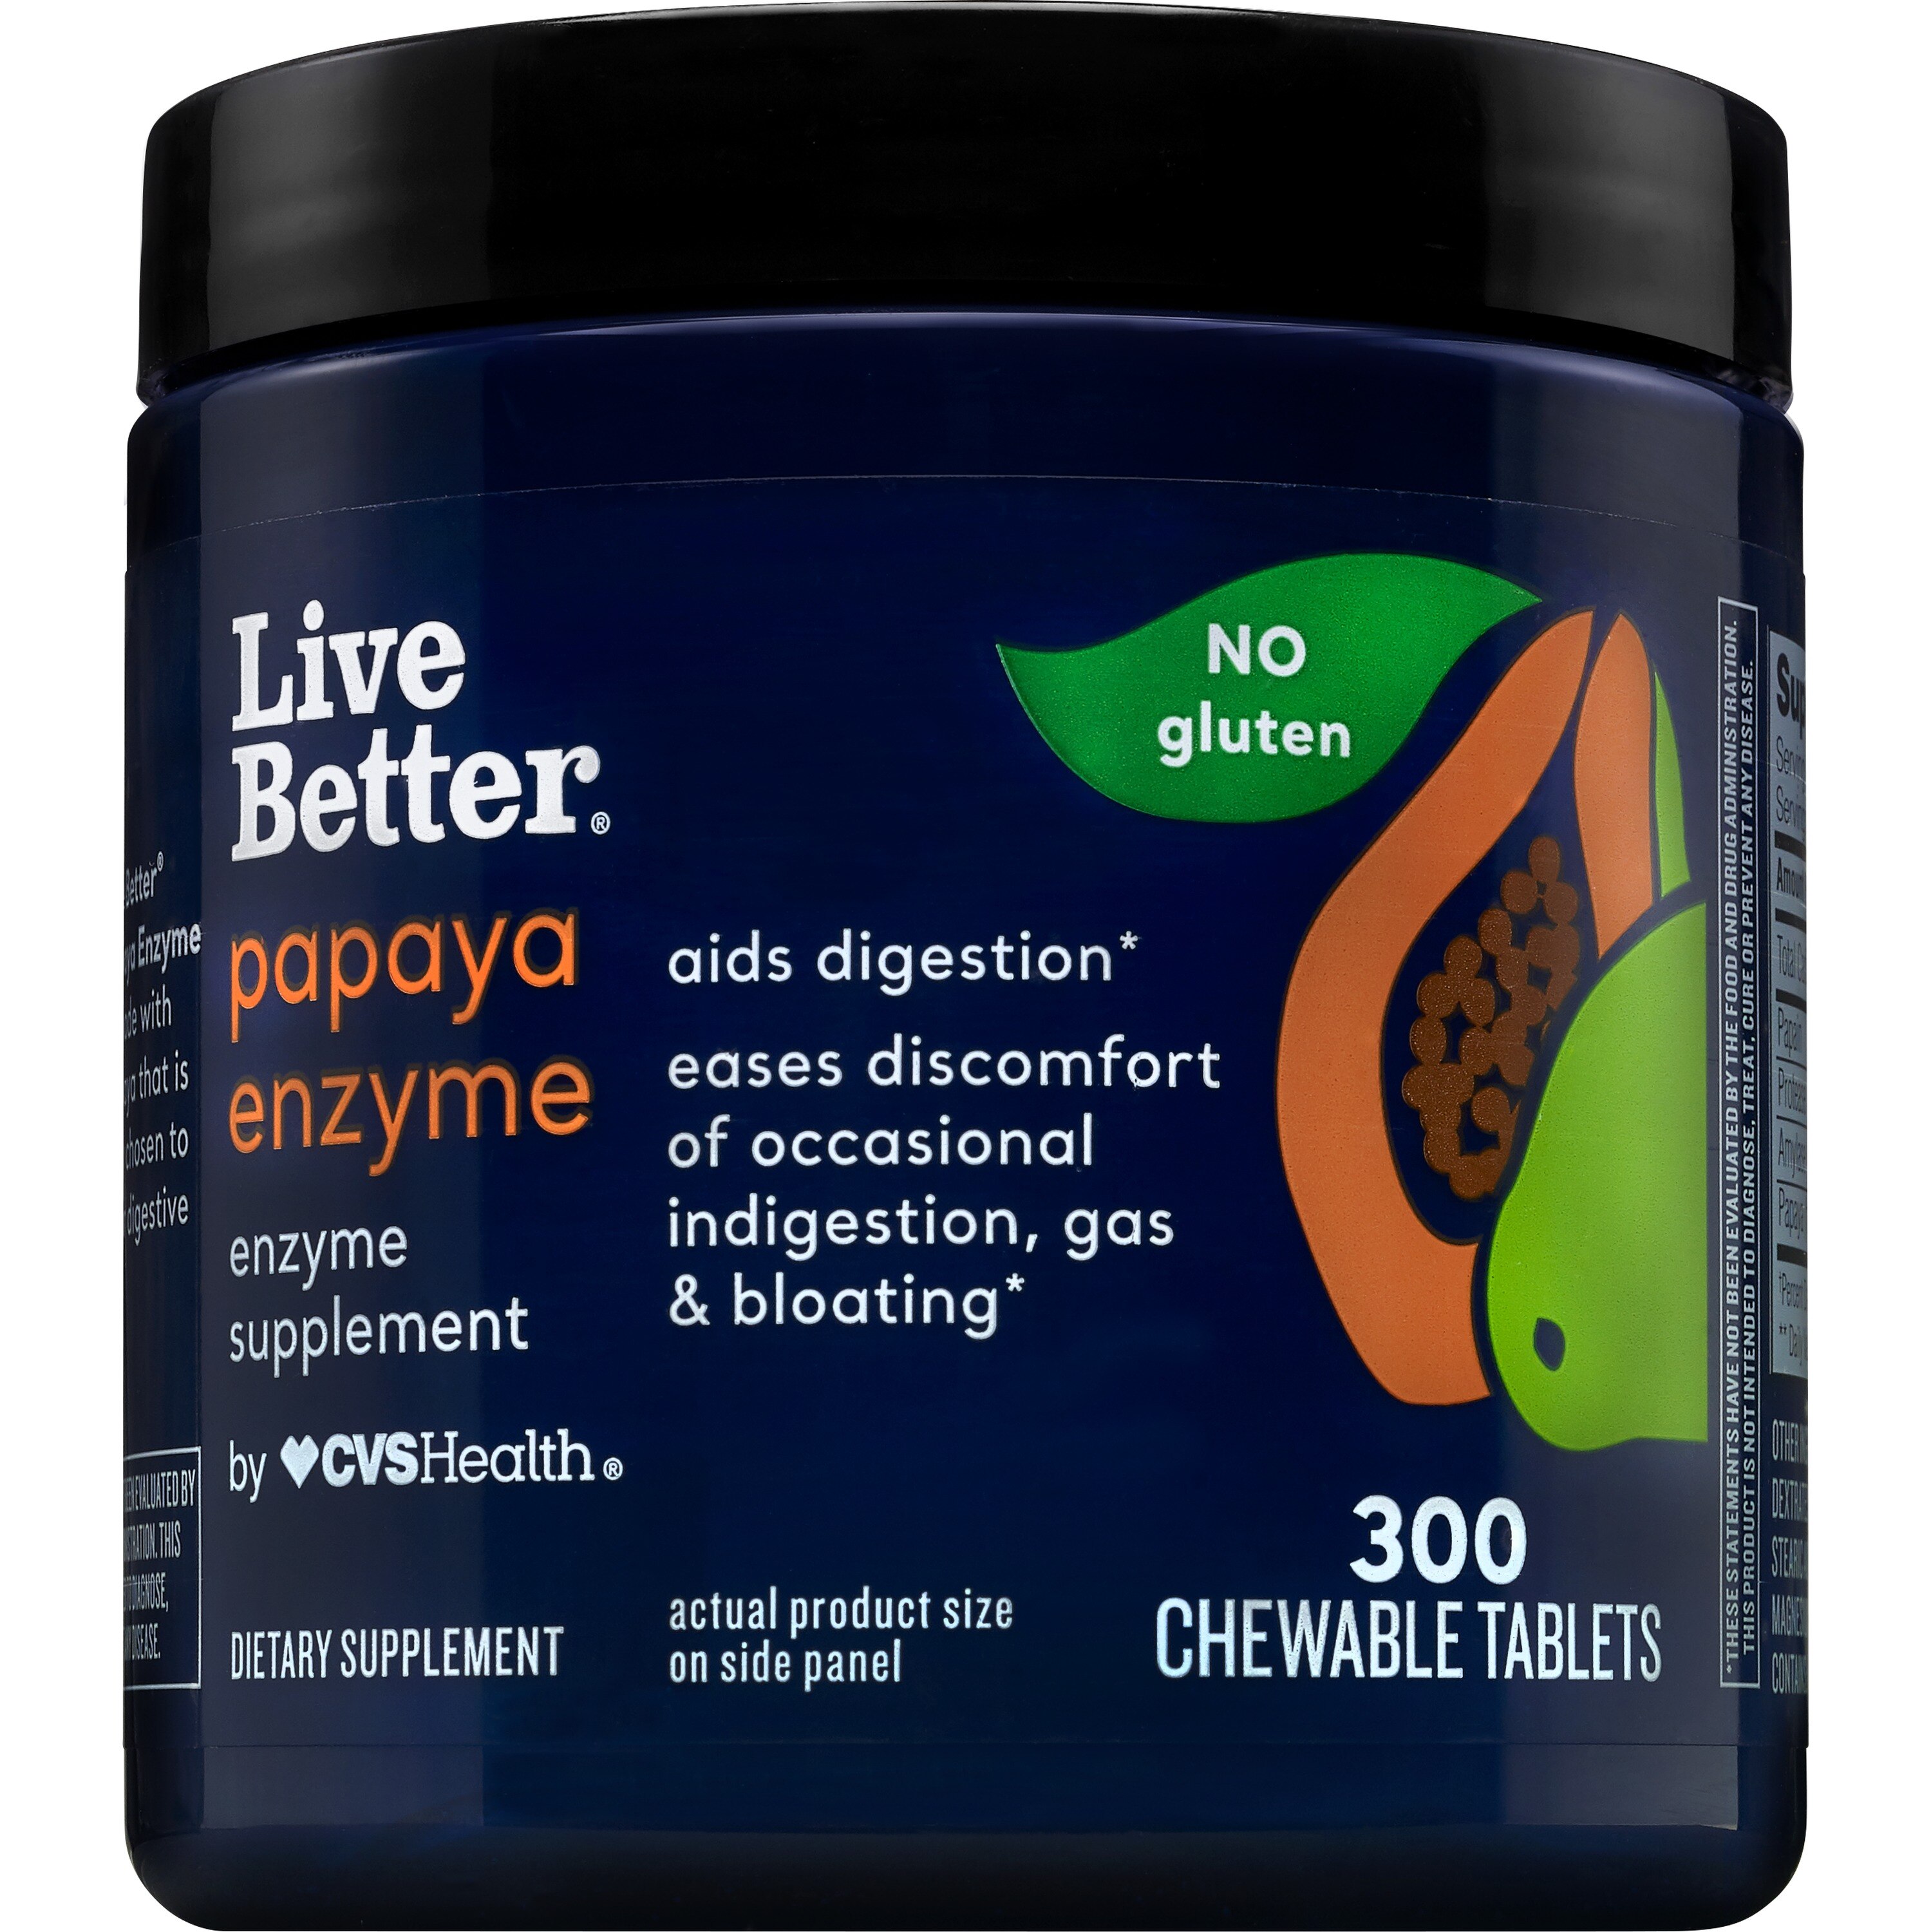 Live Better Papaya Enzyme Chewable Tablets, 300 CT